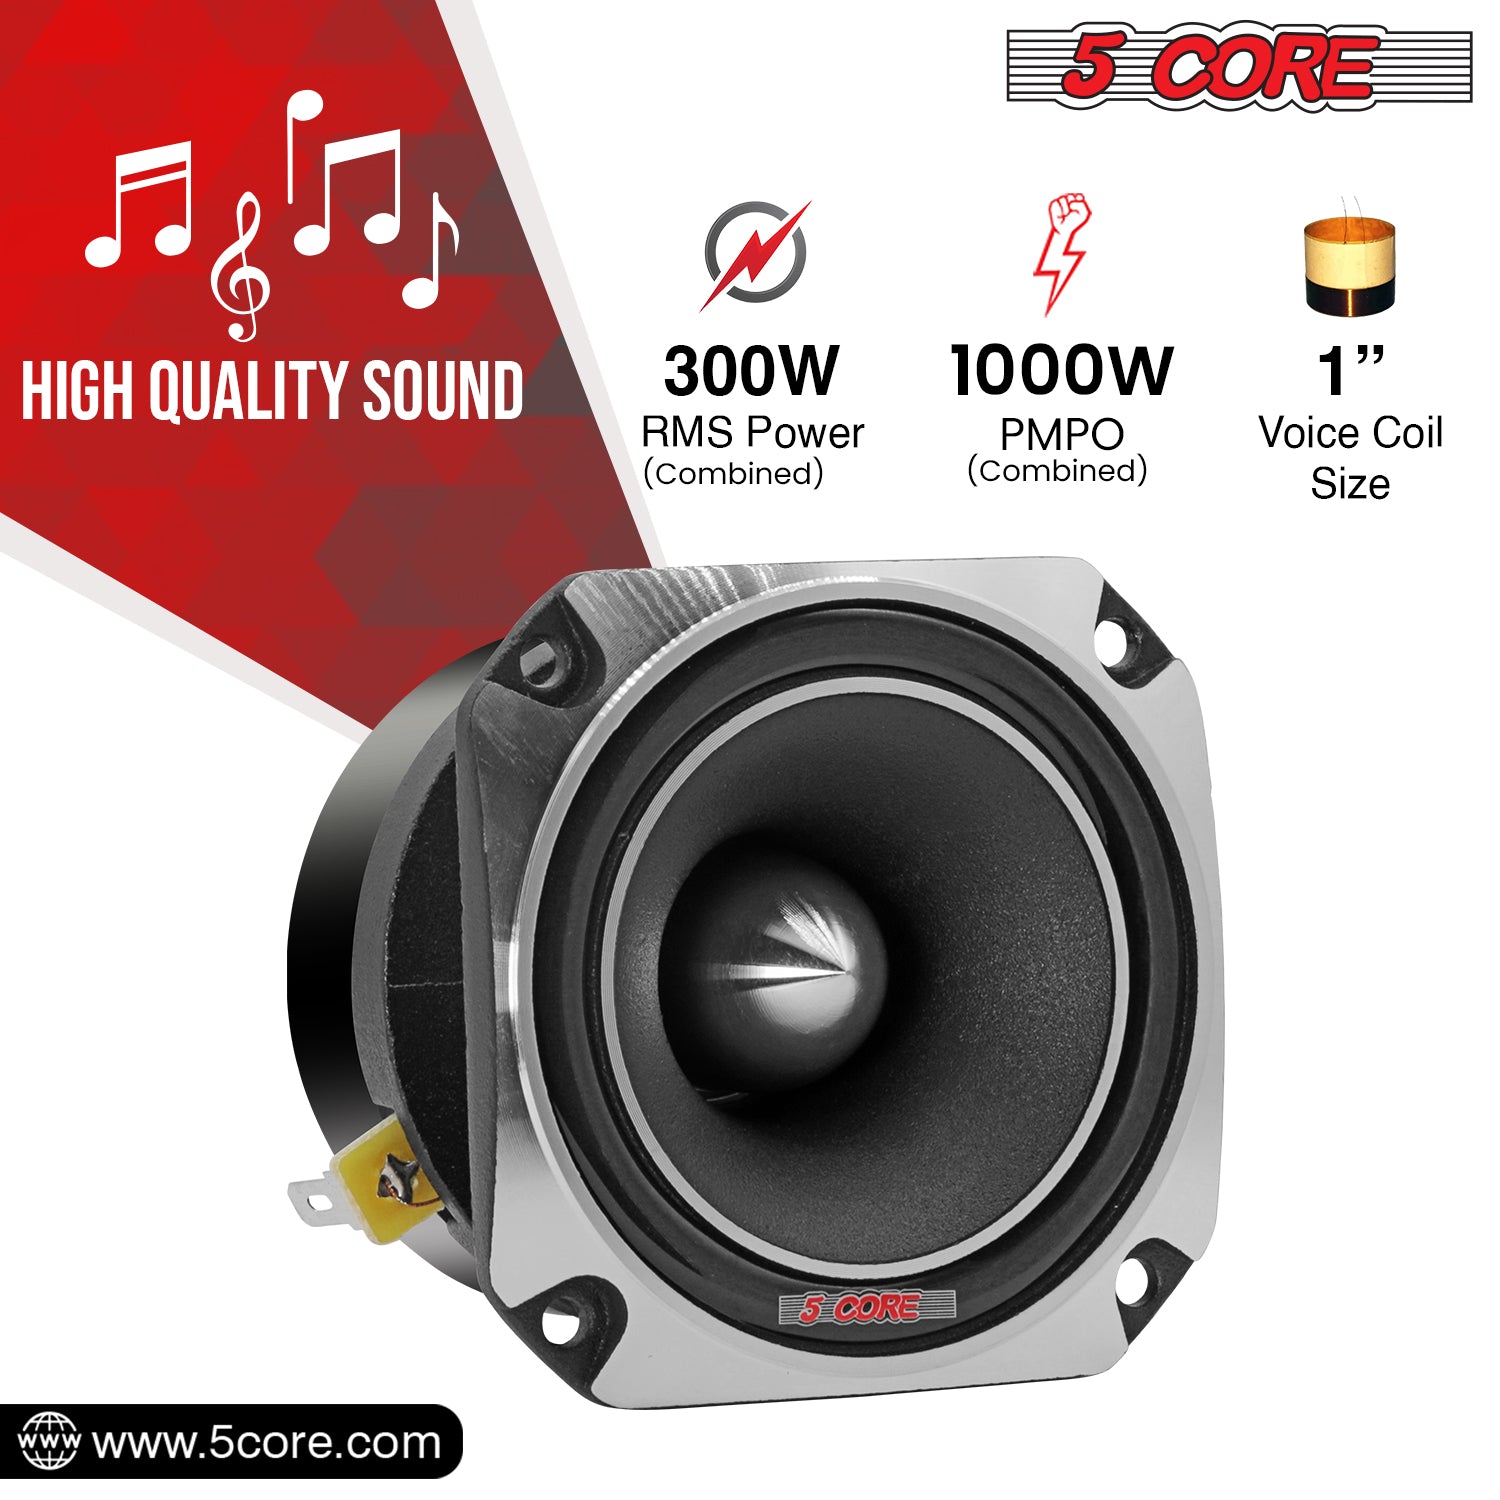 5 Core Super Bullet Tweeters deliver 300W RMS and 520W Max power for outstanding audio output and clarity.